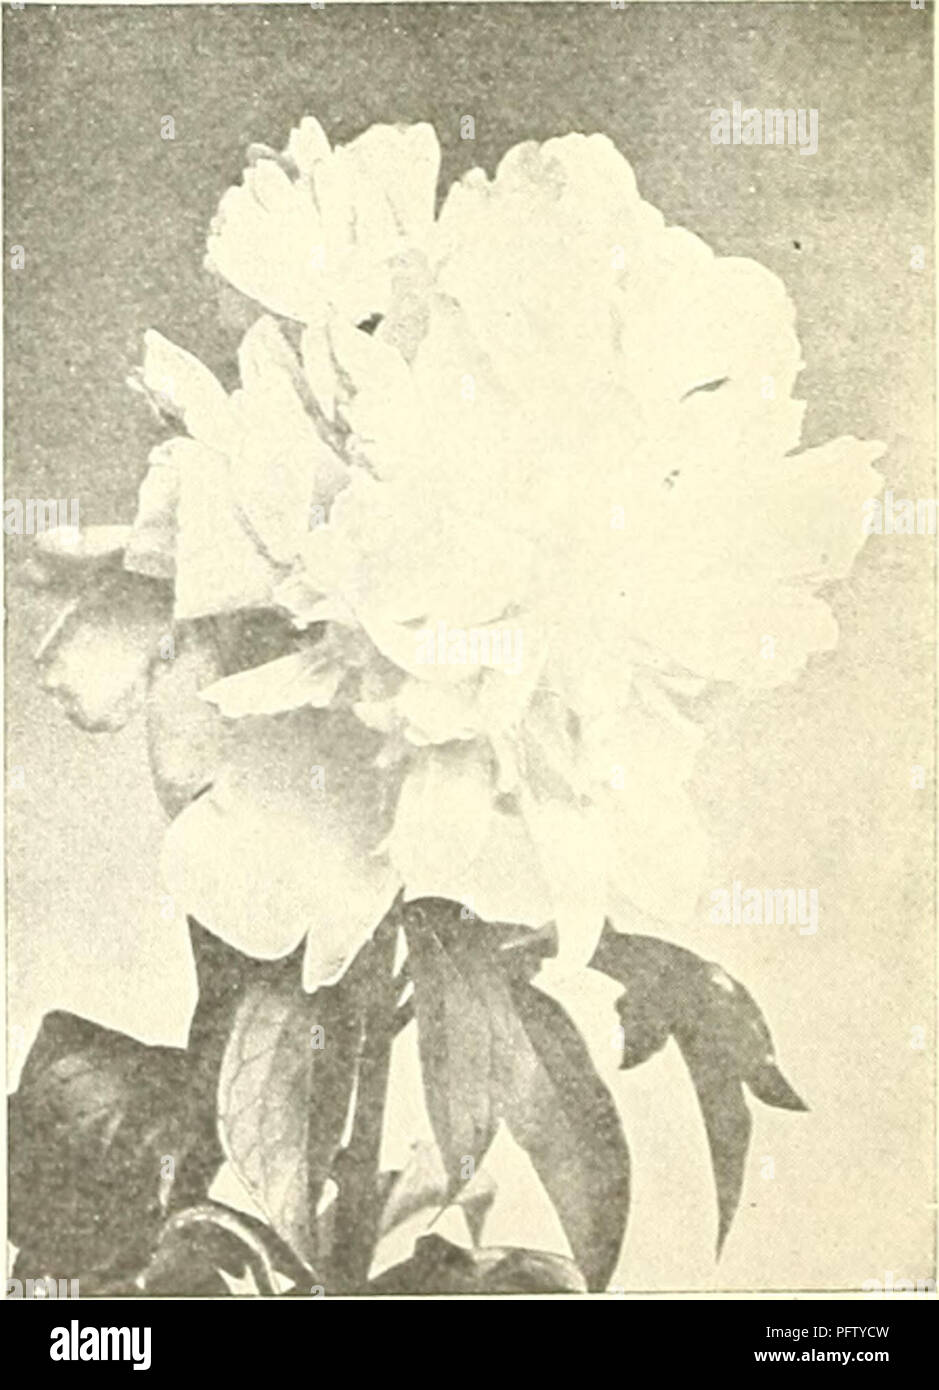 . Currie's bulbs and plants : autumn 1925. Flowers Seeds Catalogs; Bulbs (Plants) Seeds Catalogs; Nurseries (Horticulture) Catalogs; Plants, Ornamental Catalogs. PAEONIES Choice Herbaceous N'arieties. Paeonies have continued to increase in popular favor with each .succeeding year as pre-eminent among our hardy perennial plants. In response to the increasing demand, cultivators of this beautiful plant have enthusiastically en- gaged themselves in introducing and propagating new varieties, aiming at more perfect flowers of more delicate tints and deeper, richer shades. The new varieties them- se Stock Photo